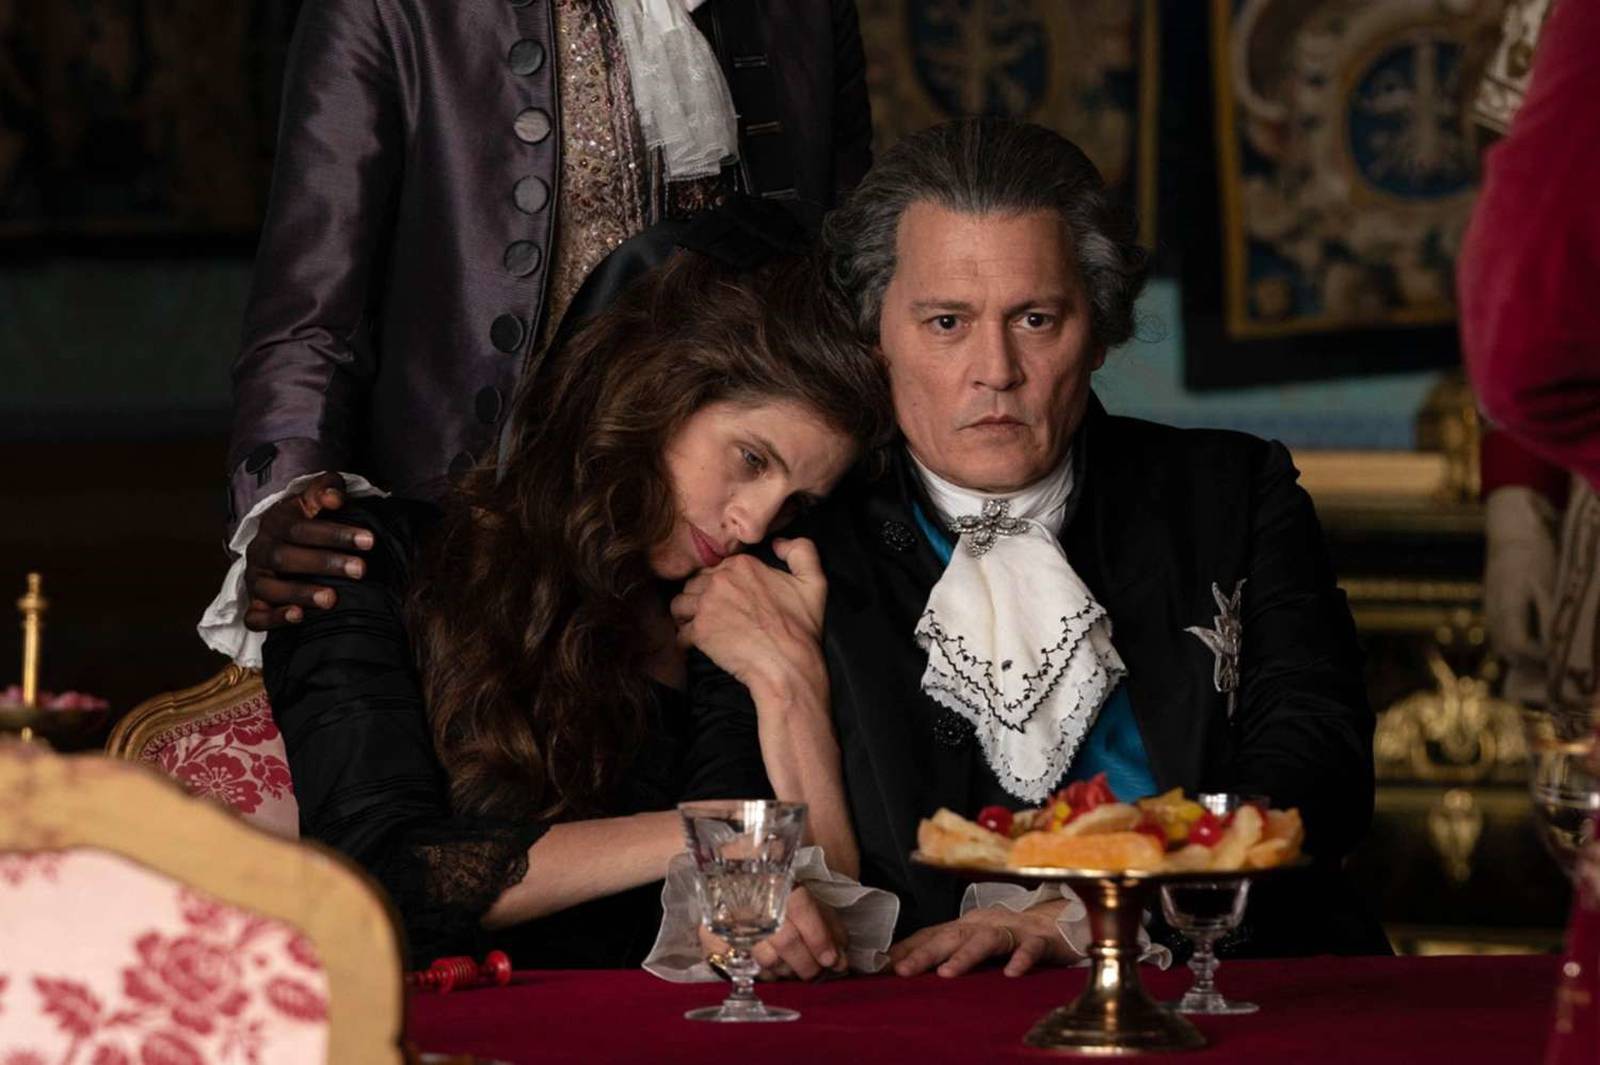 Johnny Depp in Jeanne du Barry, directed by Maïwenn, who also stars in the film, will open the 76th edition of the Cannes film festival on May 16th, 2023